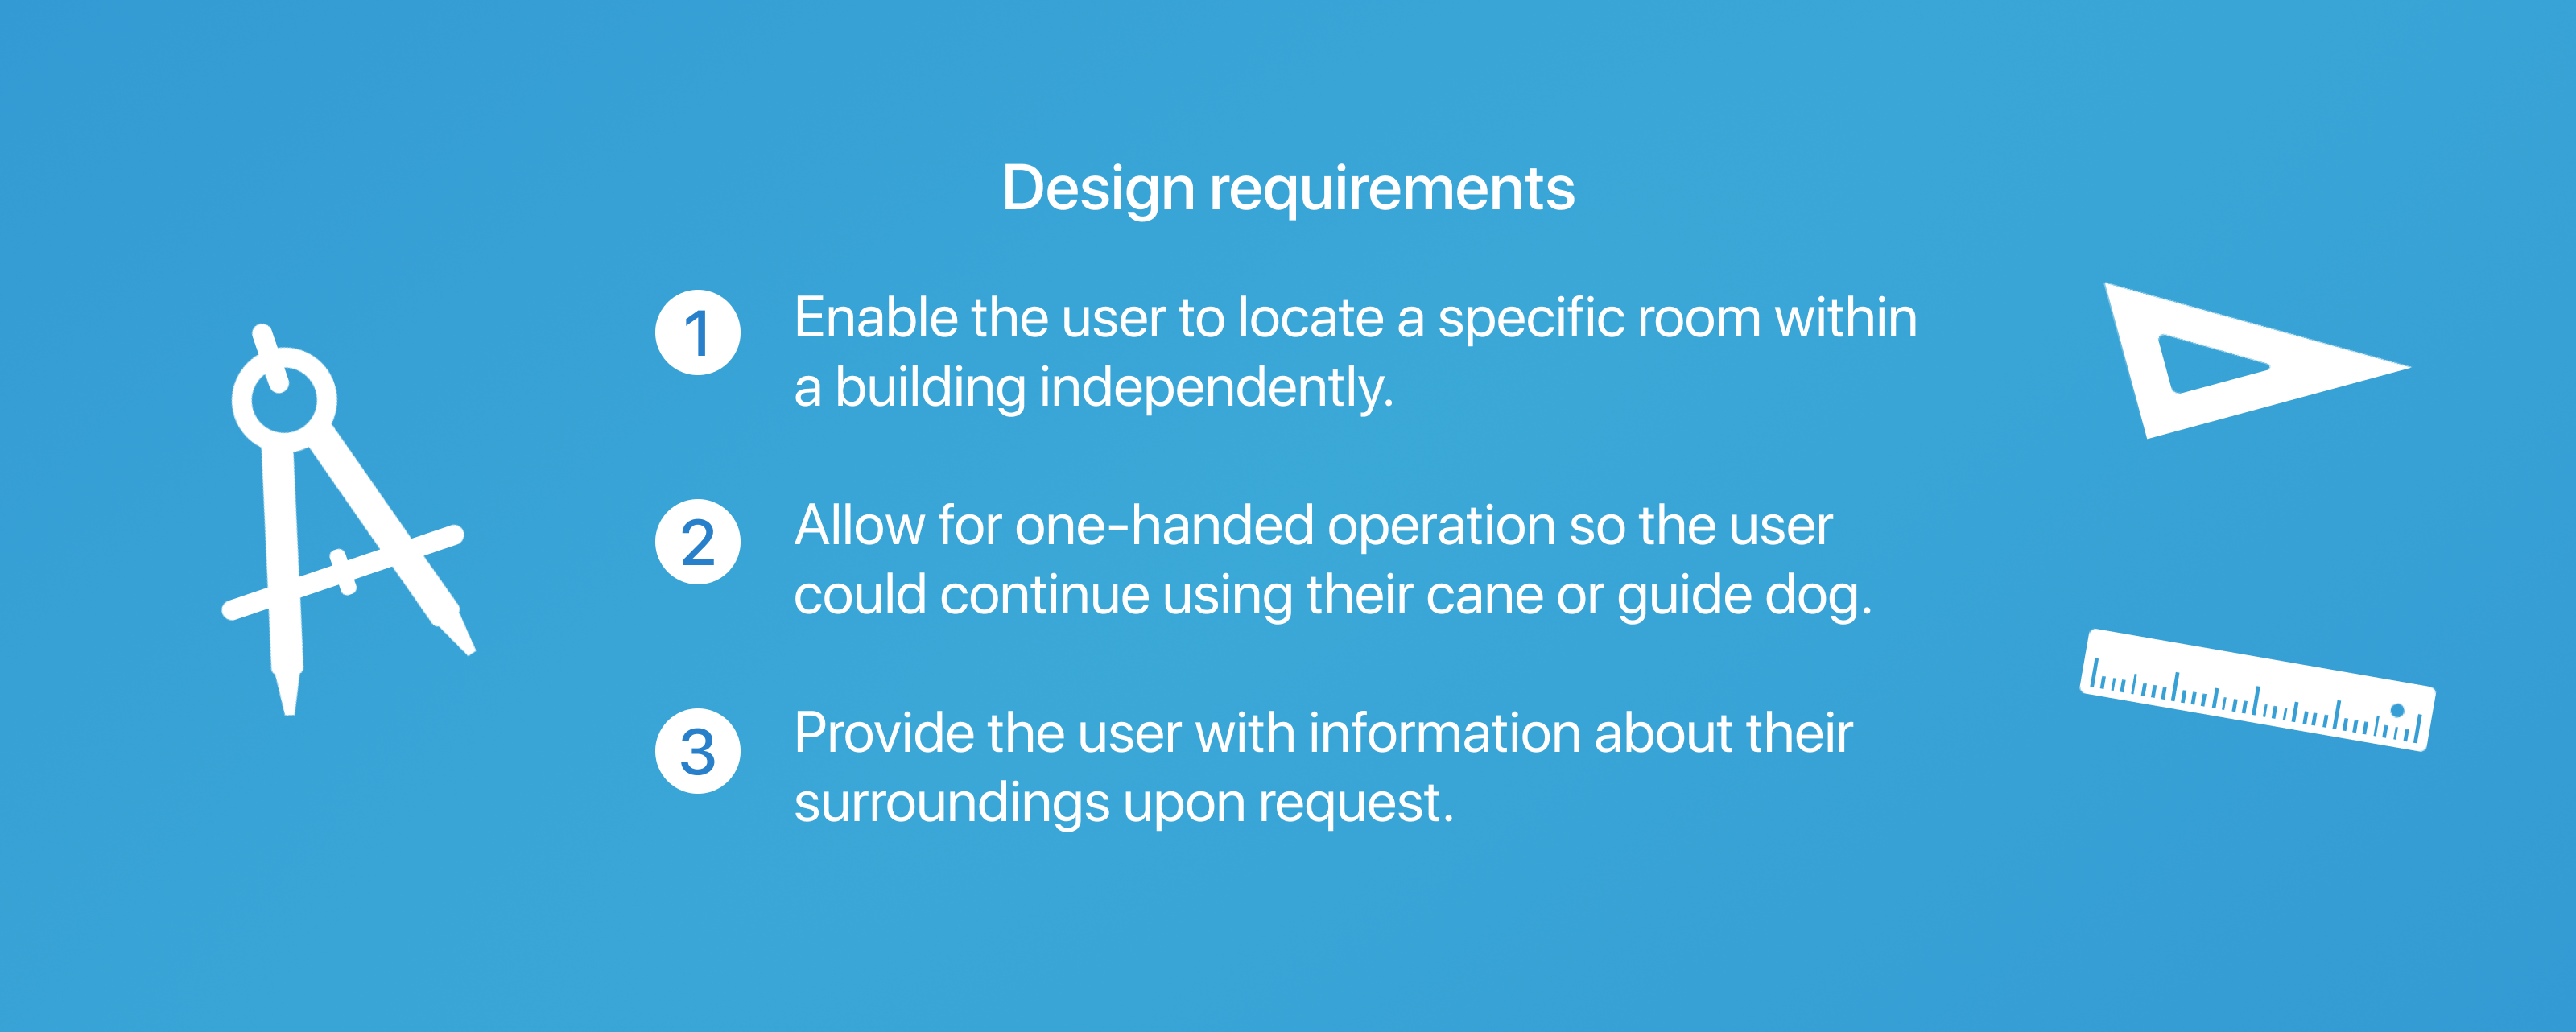 Image of our design requirements.